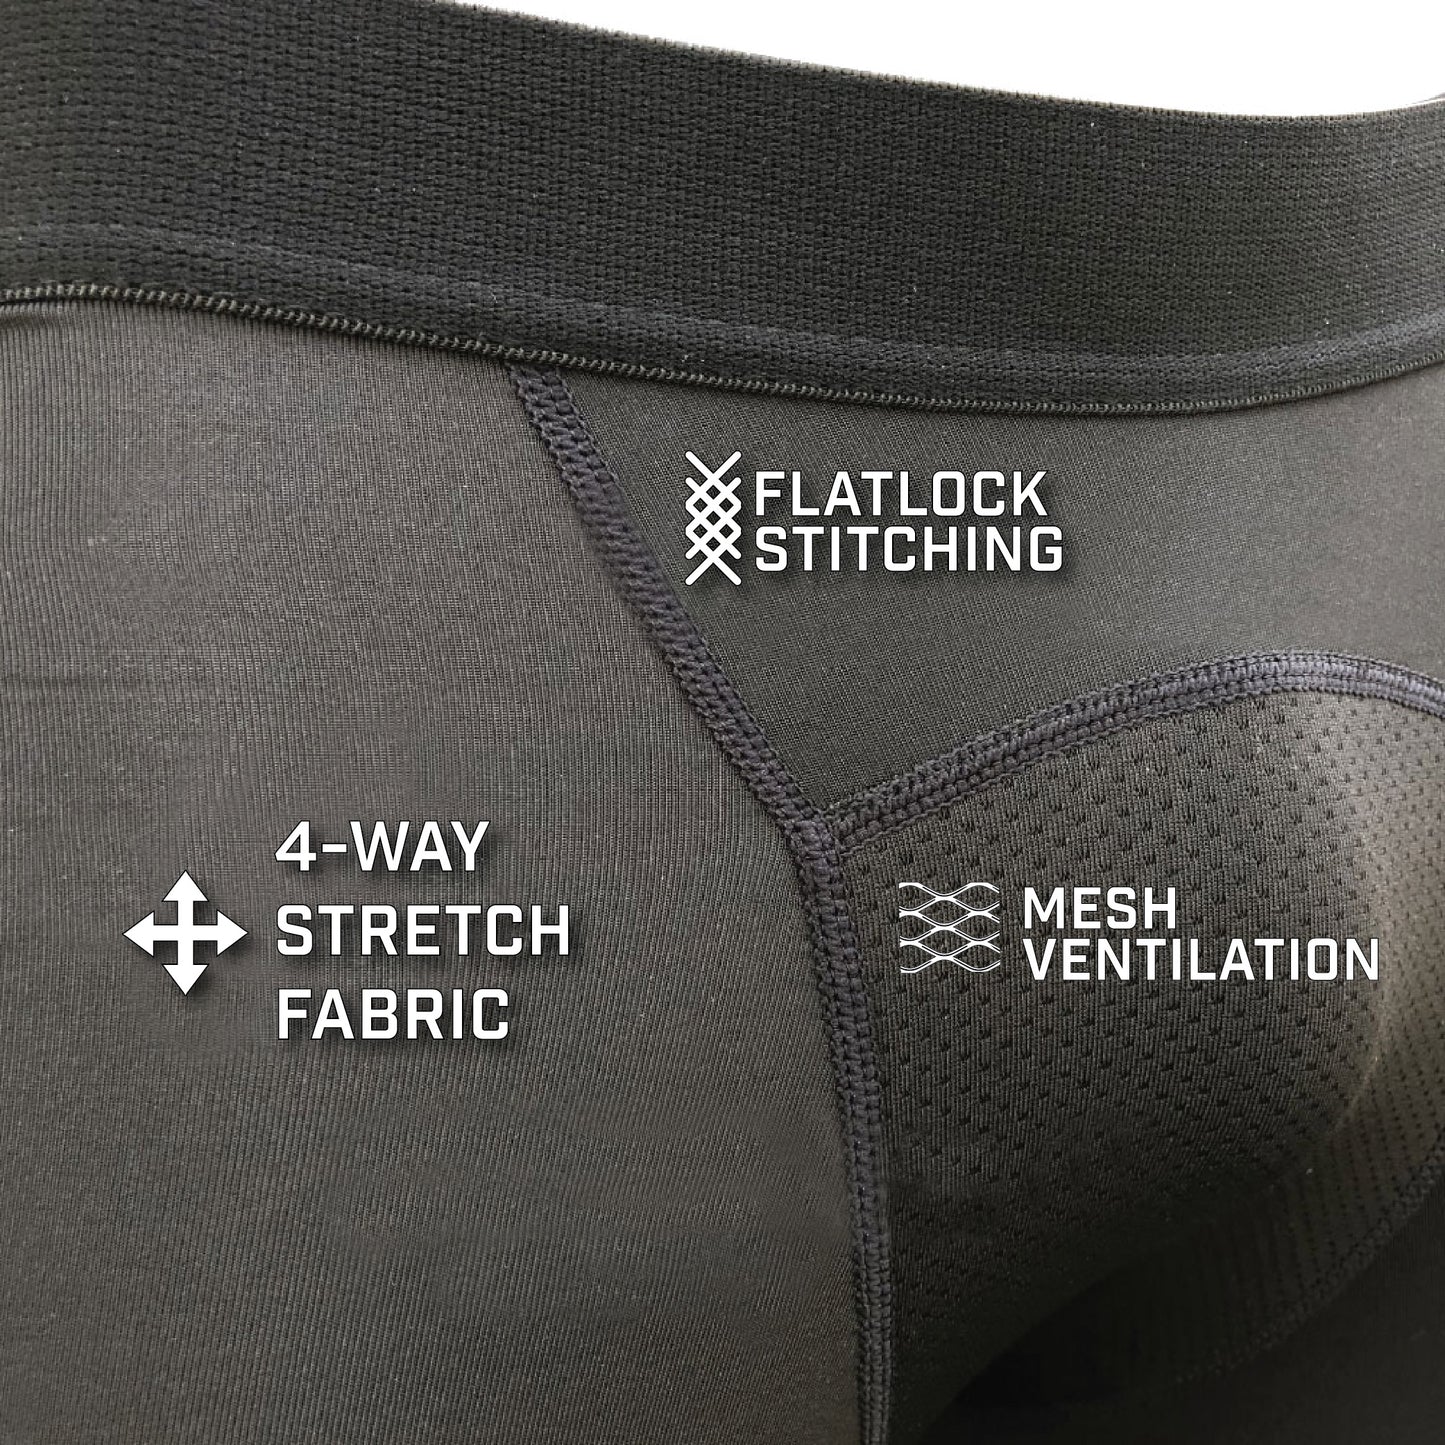 Robot Compression Tights